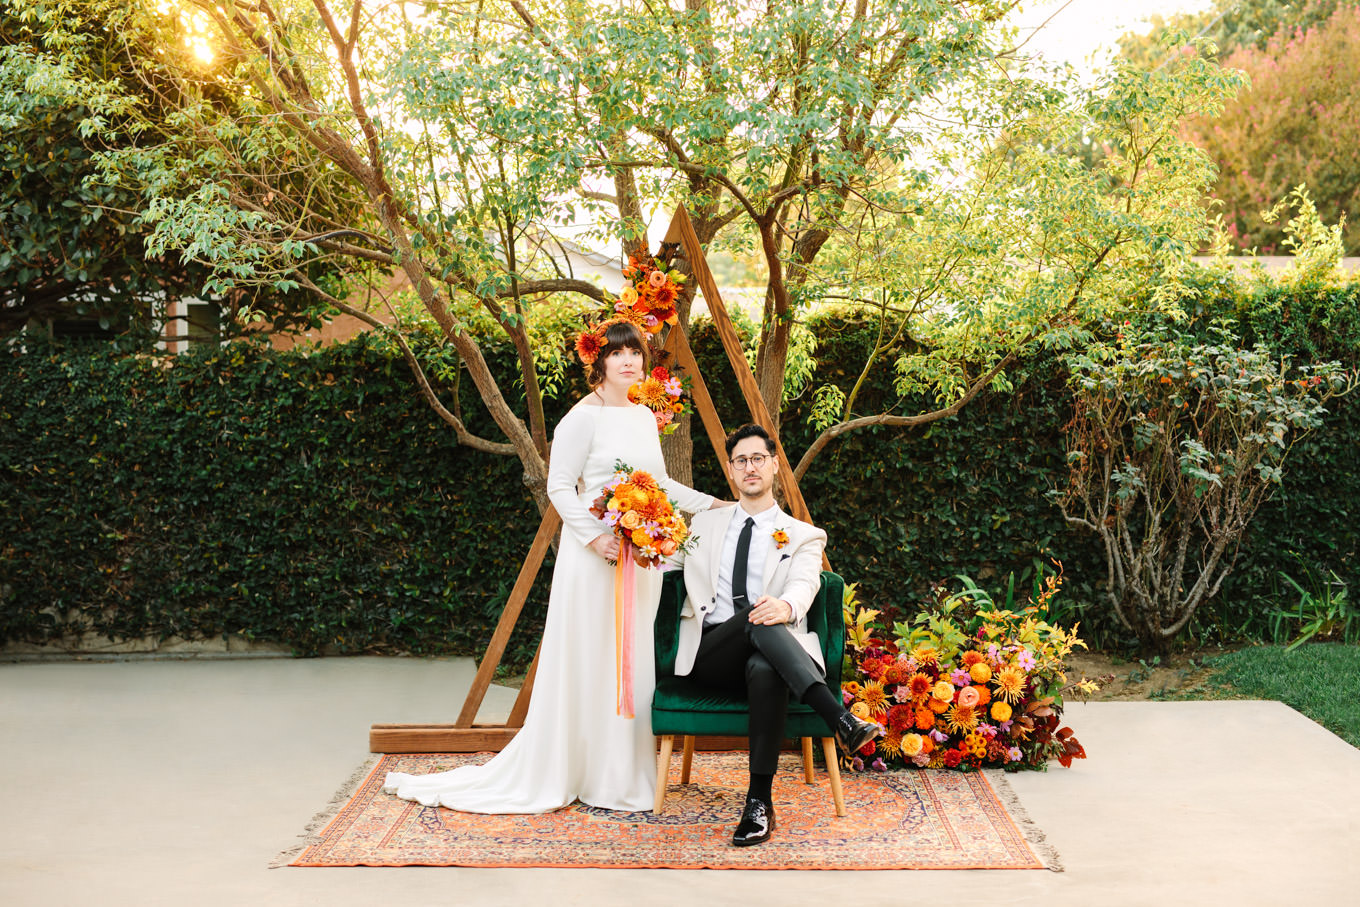 Backyard autumn micro wedding with colorful triangle arch | Engagement, elopement, and wedding photography roundup of Mary Costa’s favorite images from 2020 | Colorful and elevated photography for fun-loving couples in Southern California | #2020wedding #elopement #weddingphoto #weddingphotography #microwedding   Source: Mary Costa Photography | Los Angeles